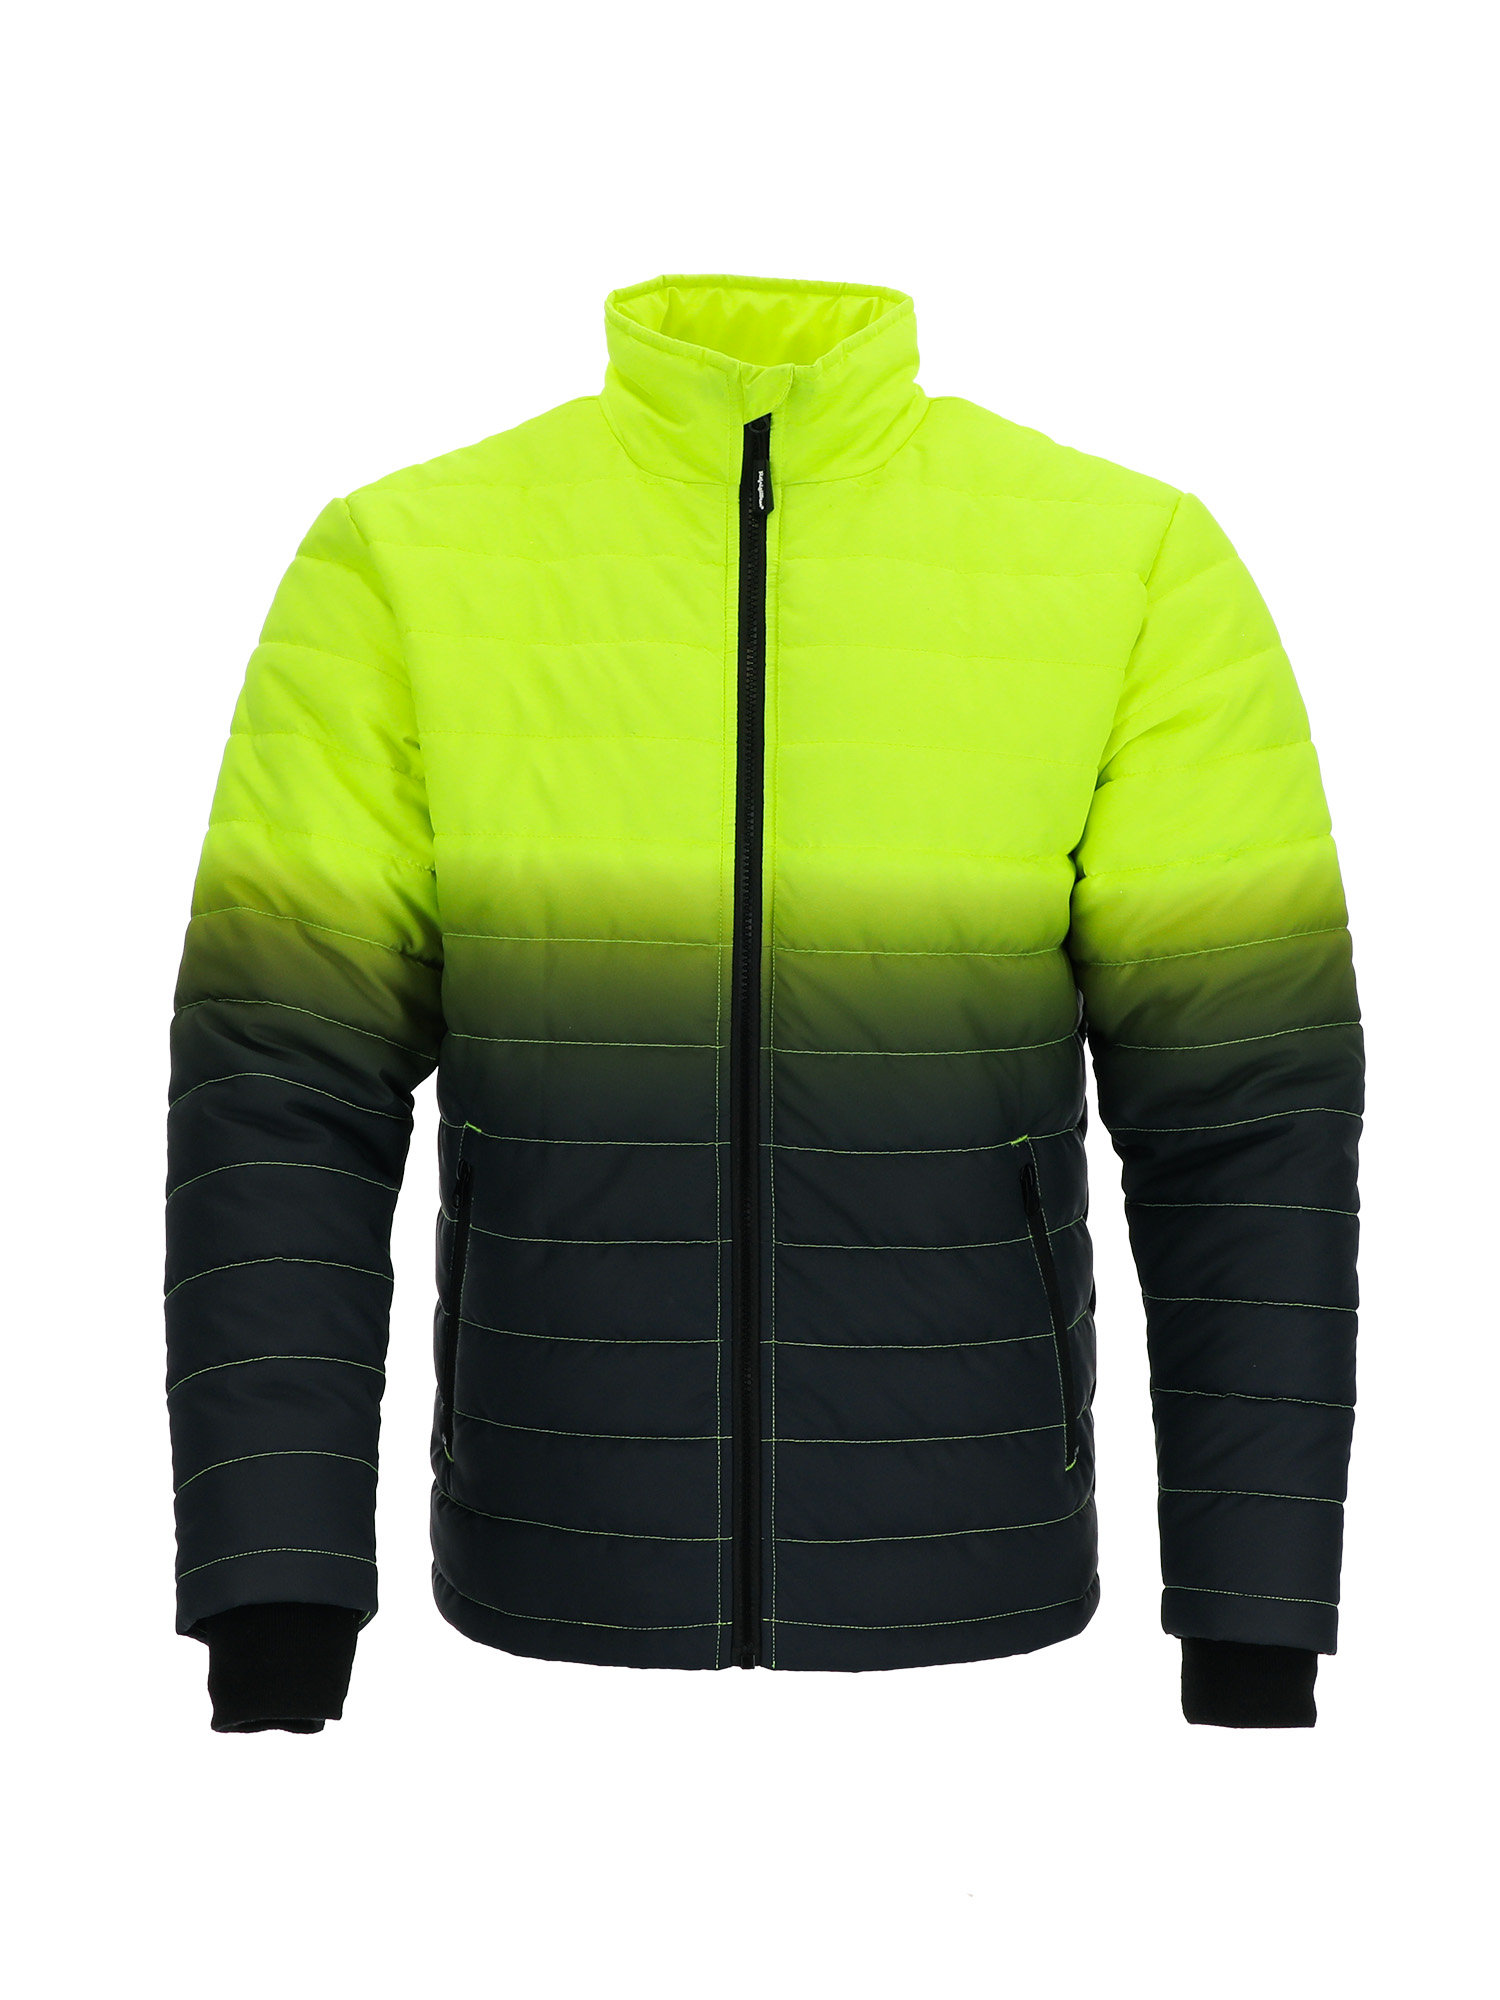 RefrigiWear Enhanced Visibility Quilted Jacket | Lime/Navy | Fit: Big & Tall | 100% Polyester | 2XL